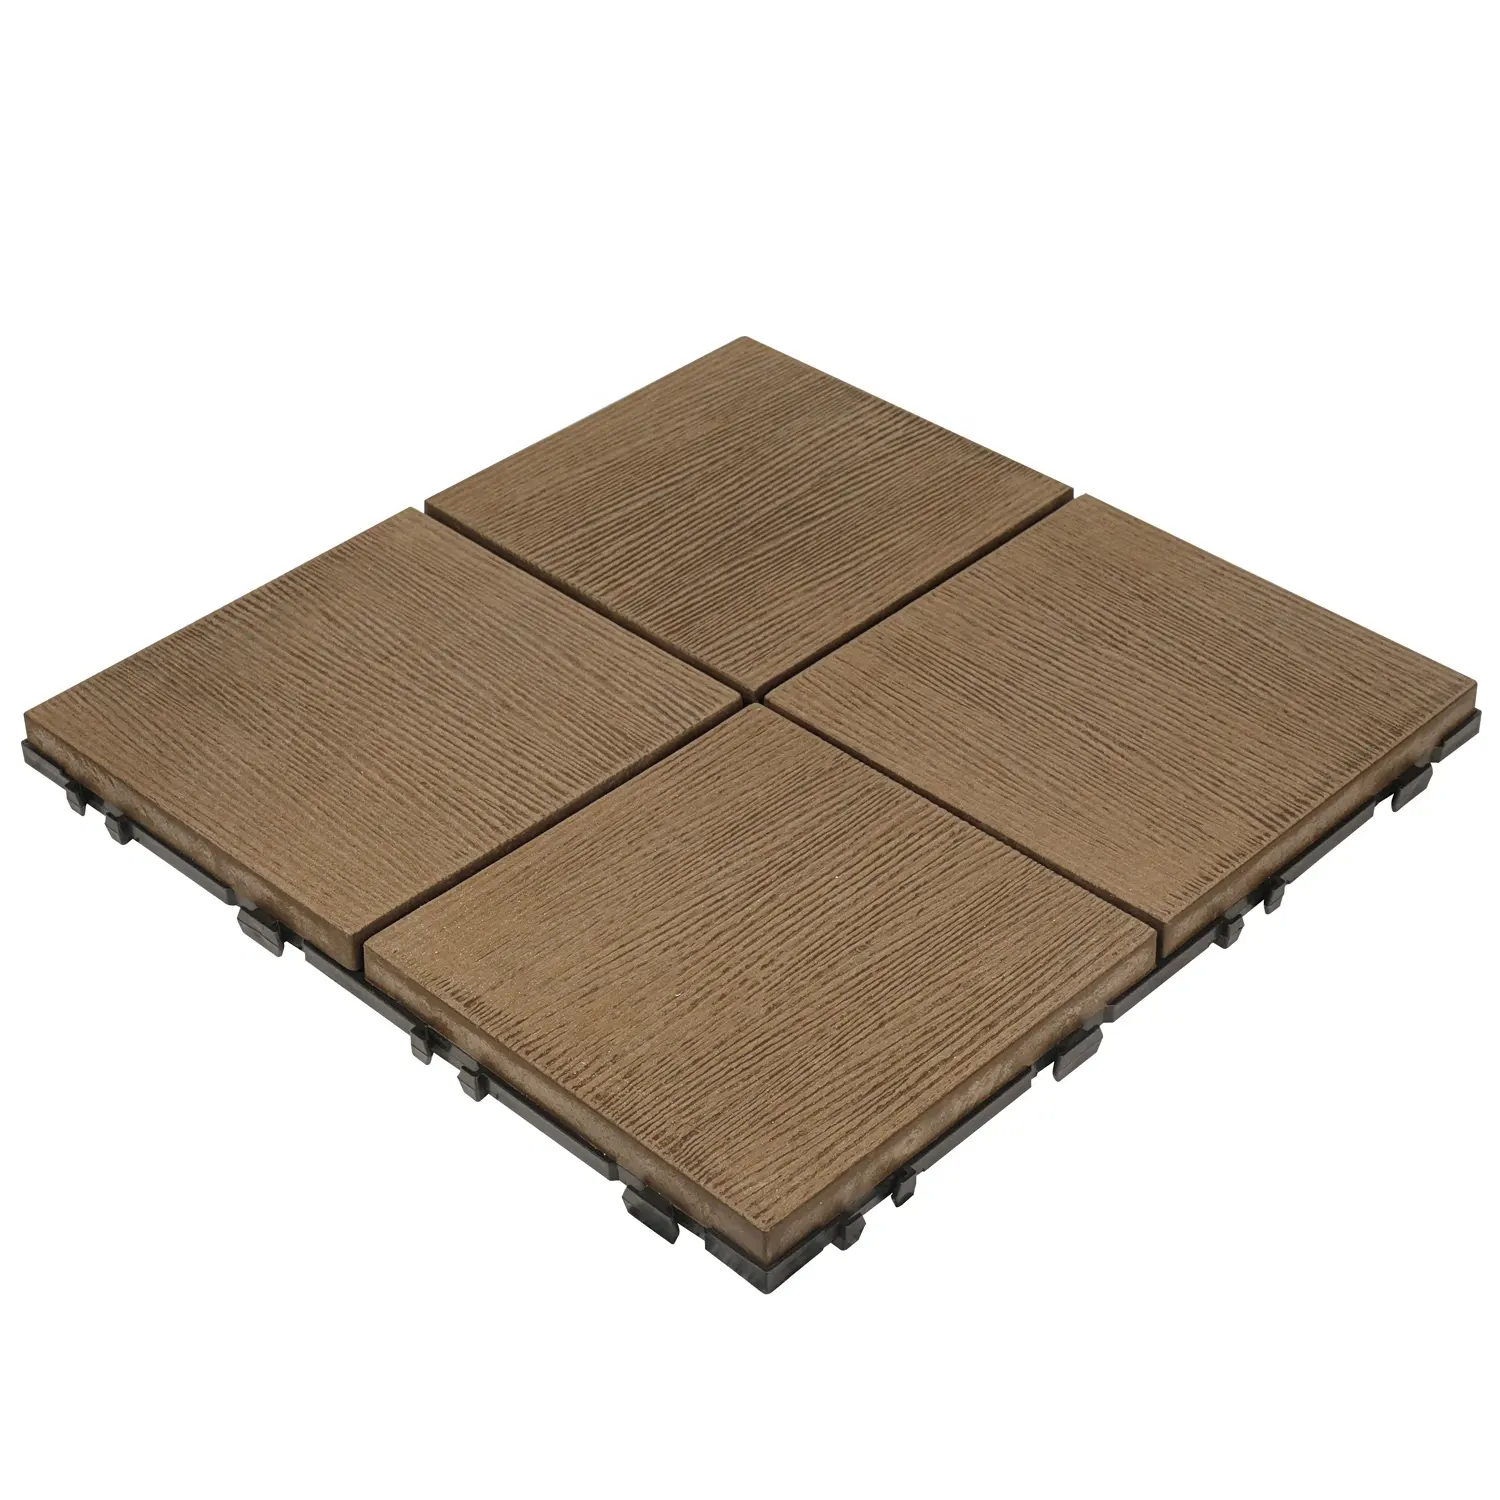 Easy-to-Install Long-Lasting WPC Interlocking Tiles Wood Plastic Composite Roof Tiles XF-N010 300*300*25 mm